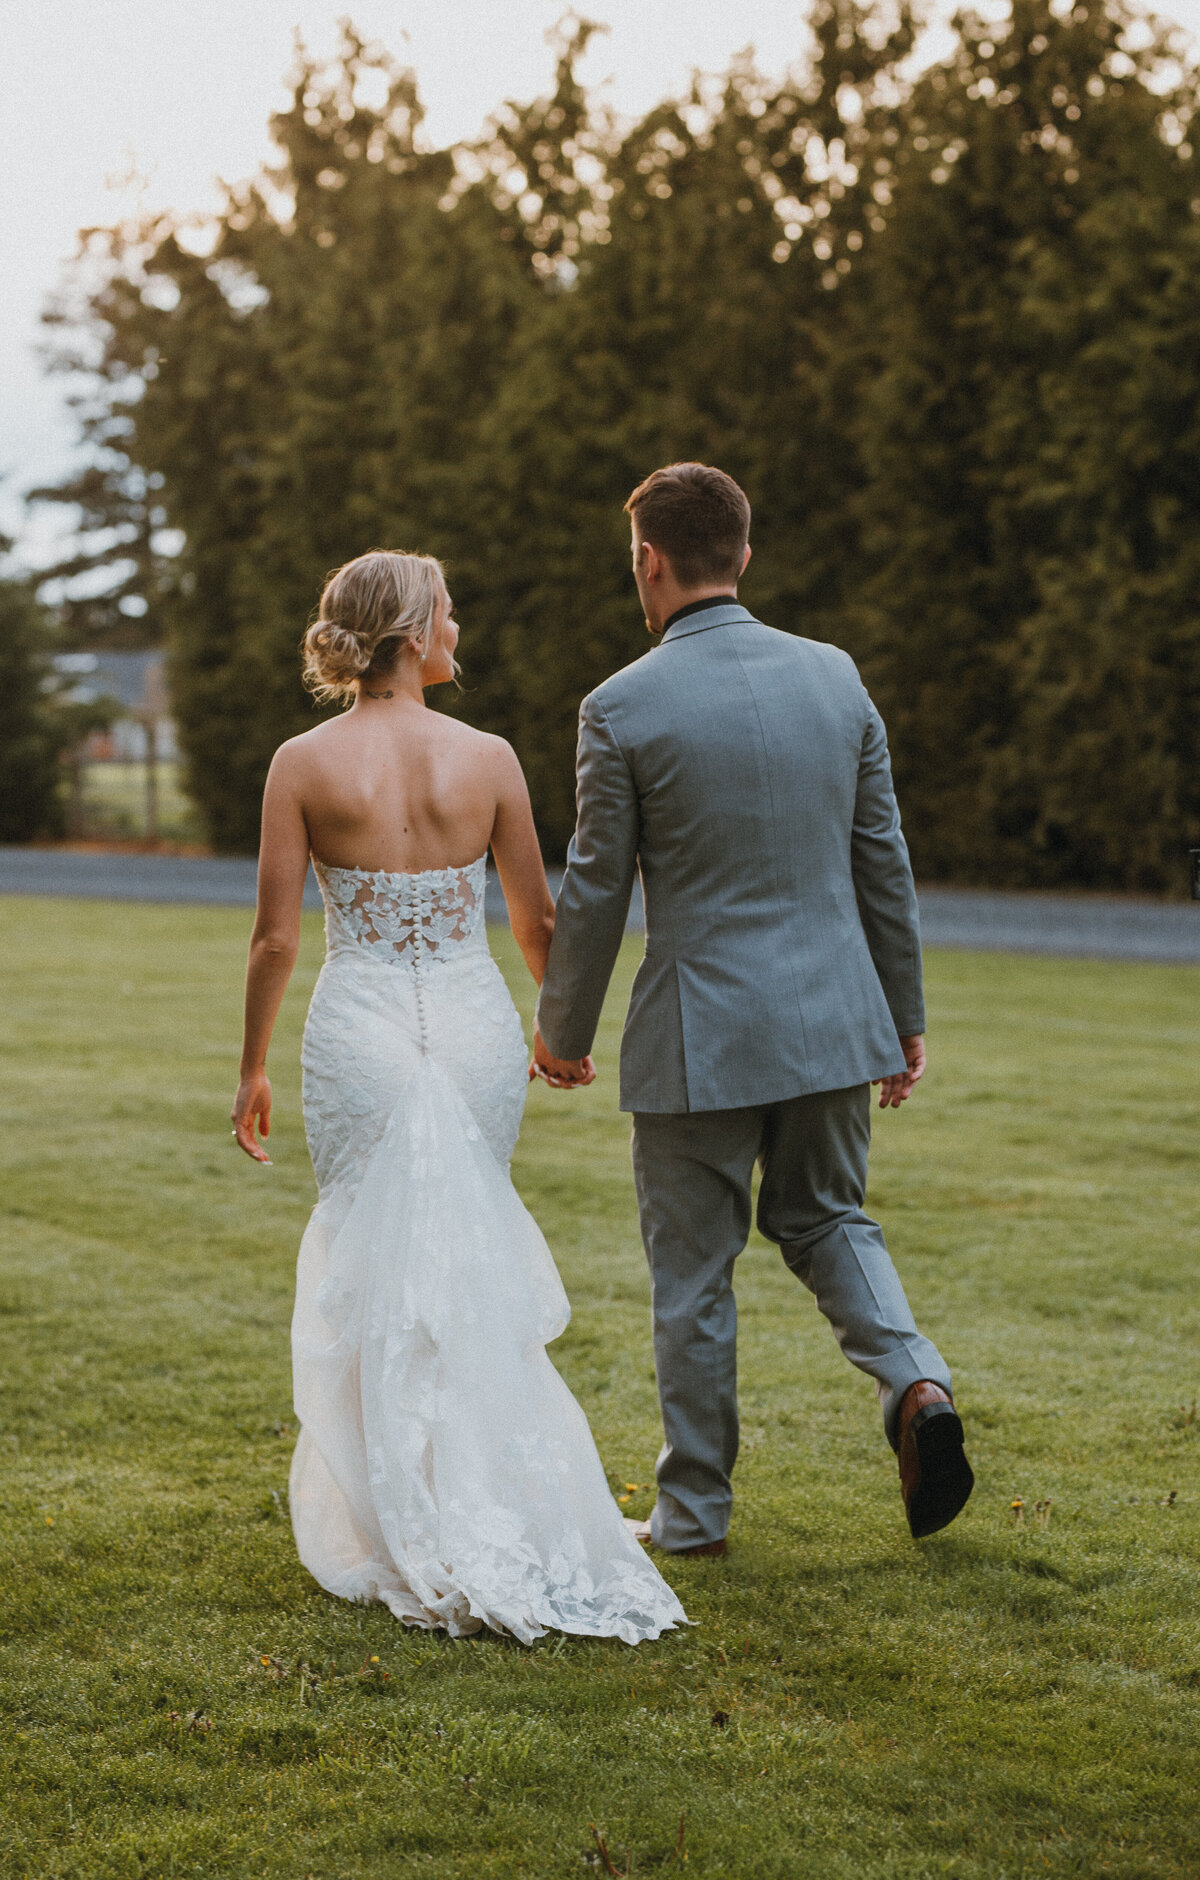 Bride and groom holding hands walking on a green lawn